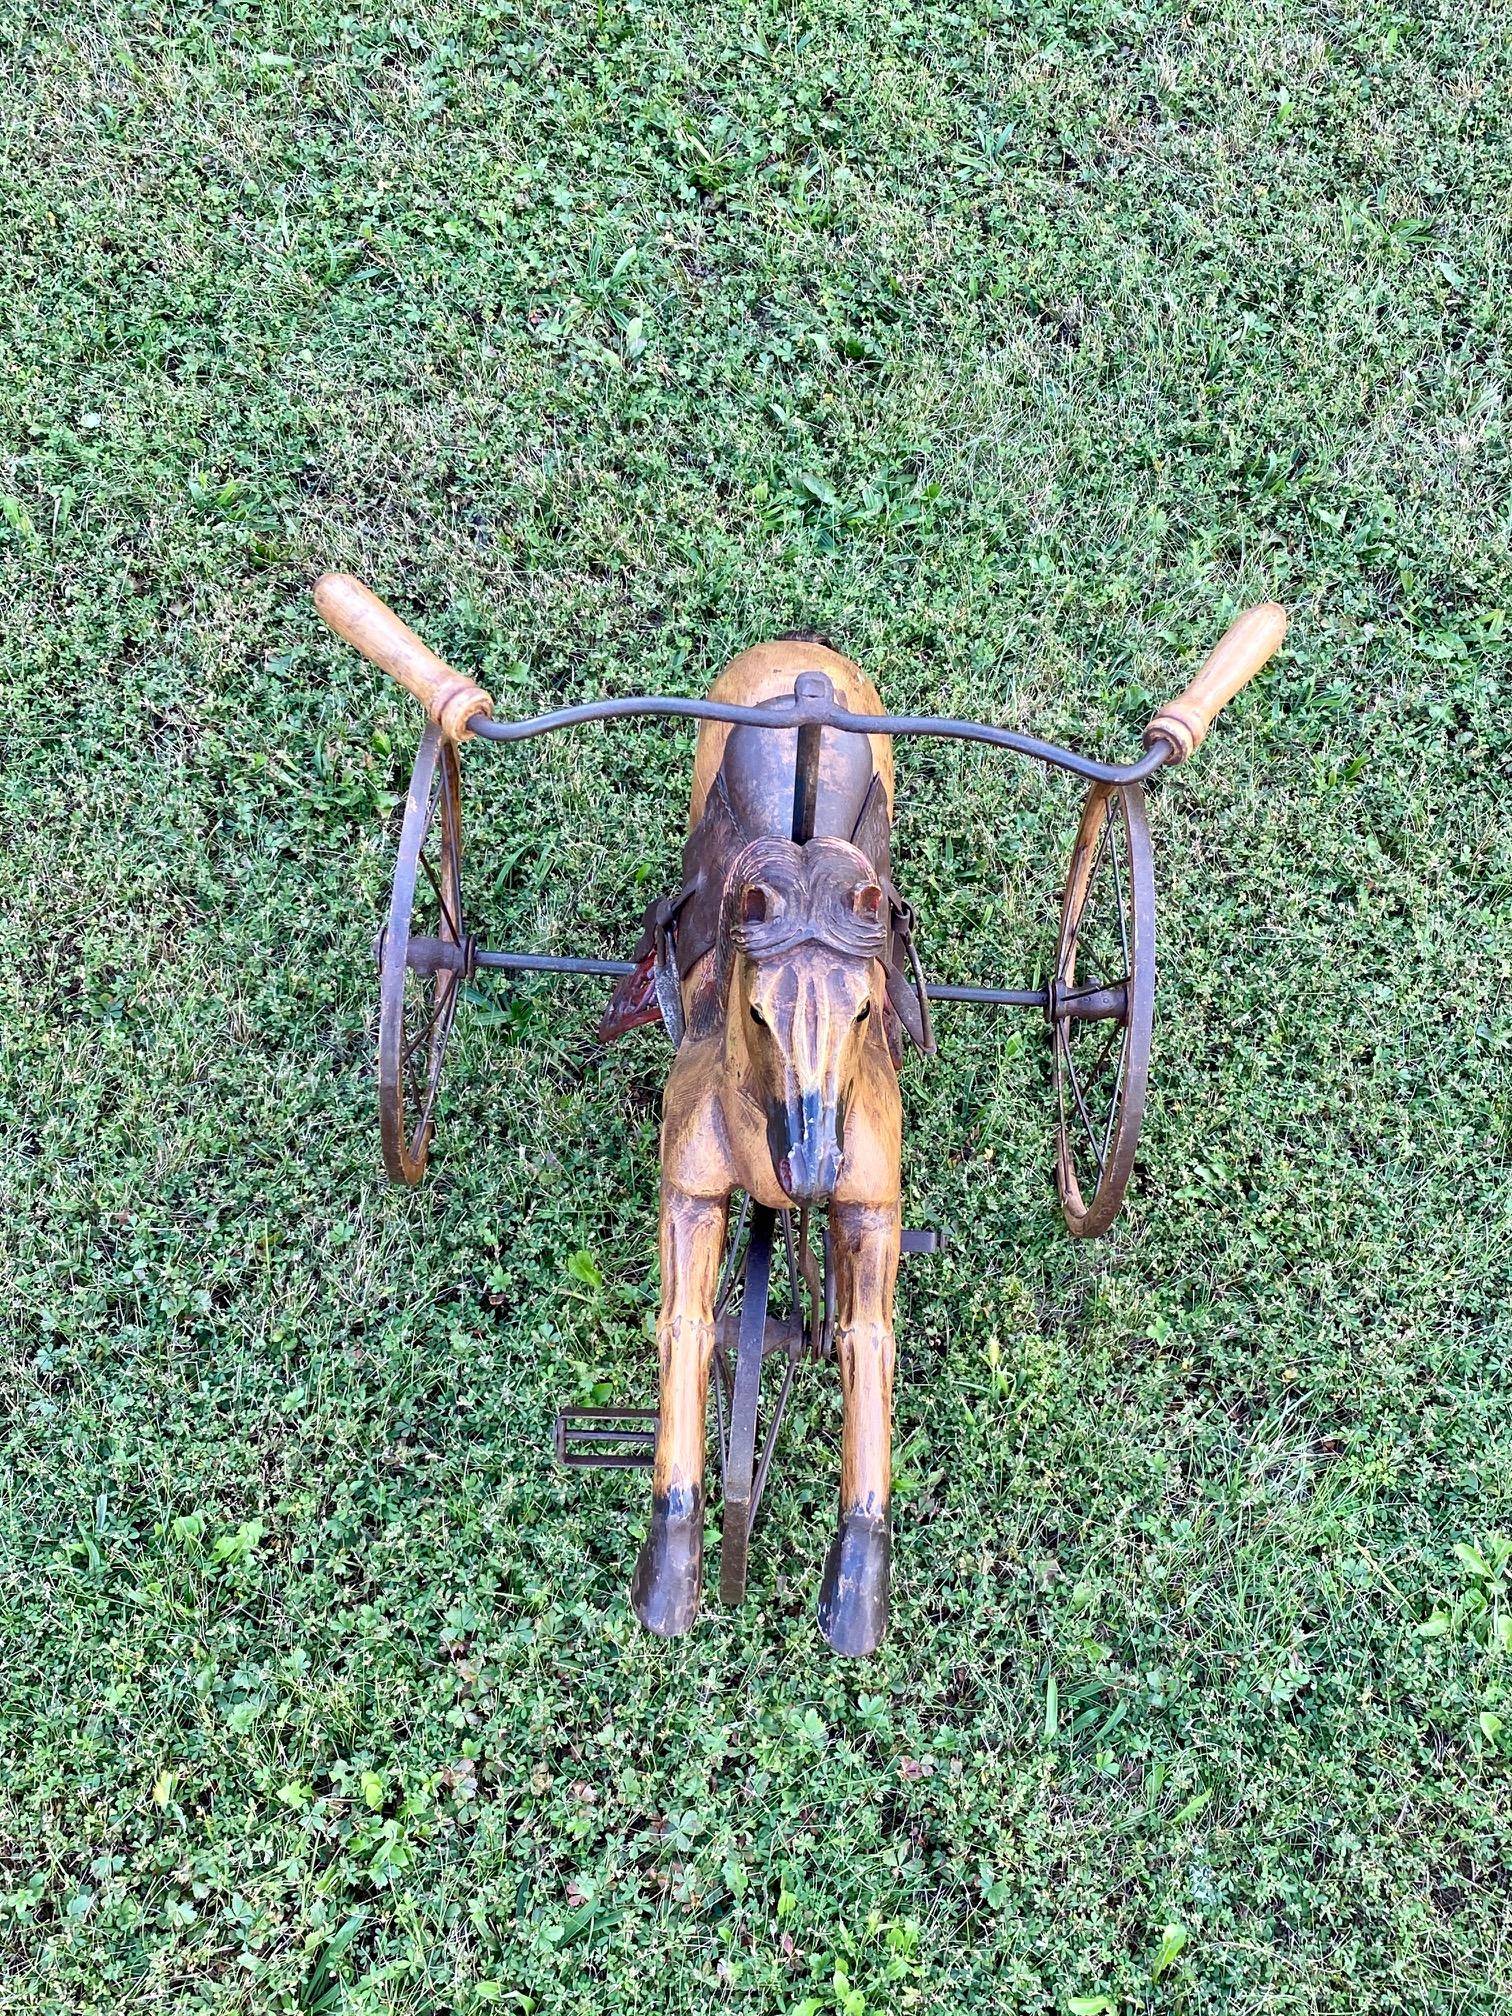 Charming Folk Art Child's Bicycle in the Shape of a Horse 3